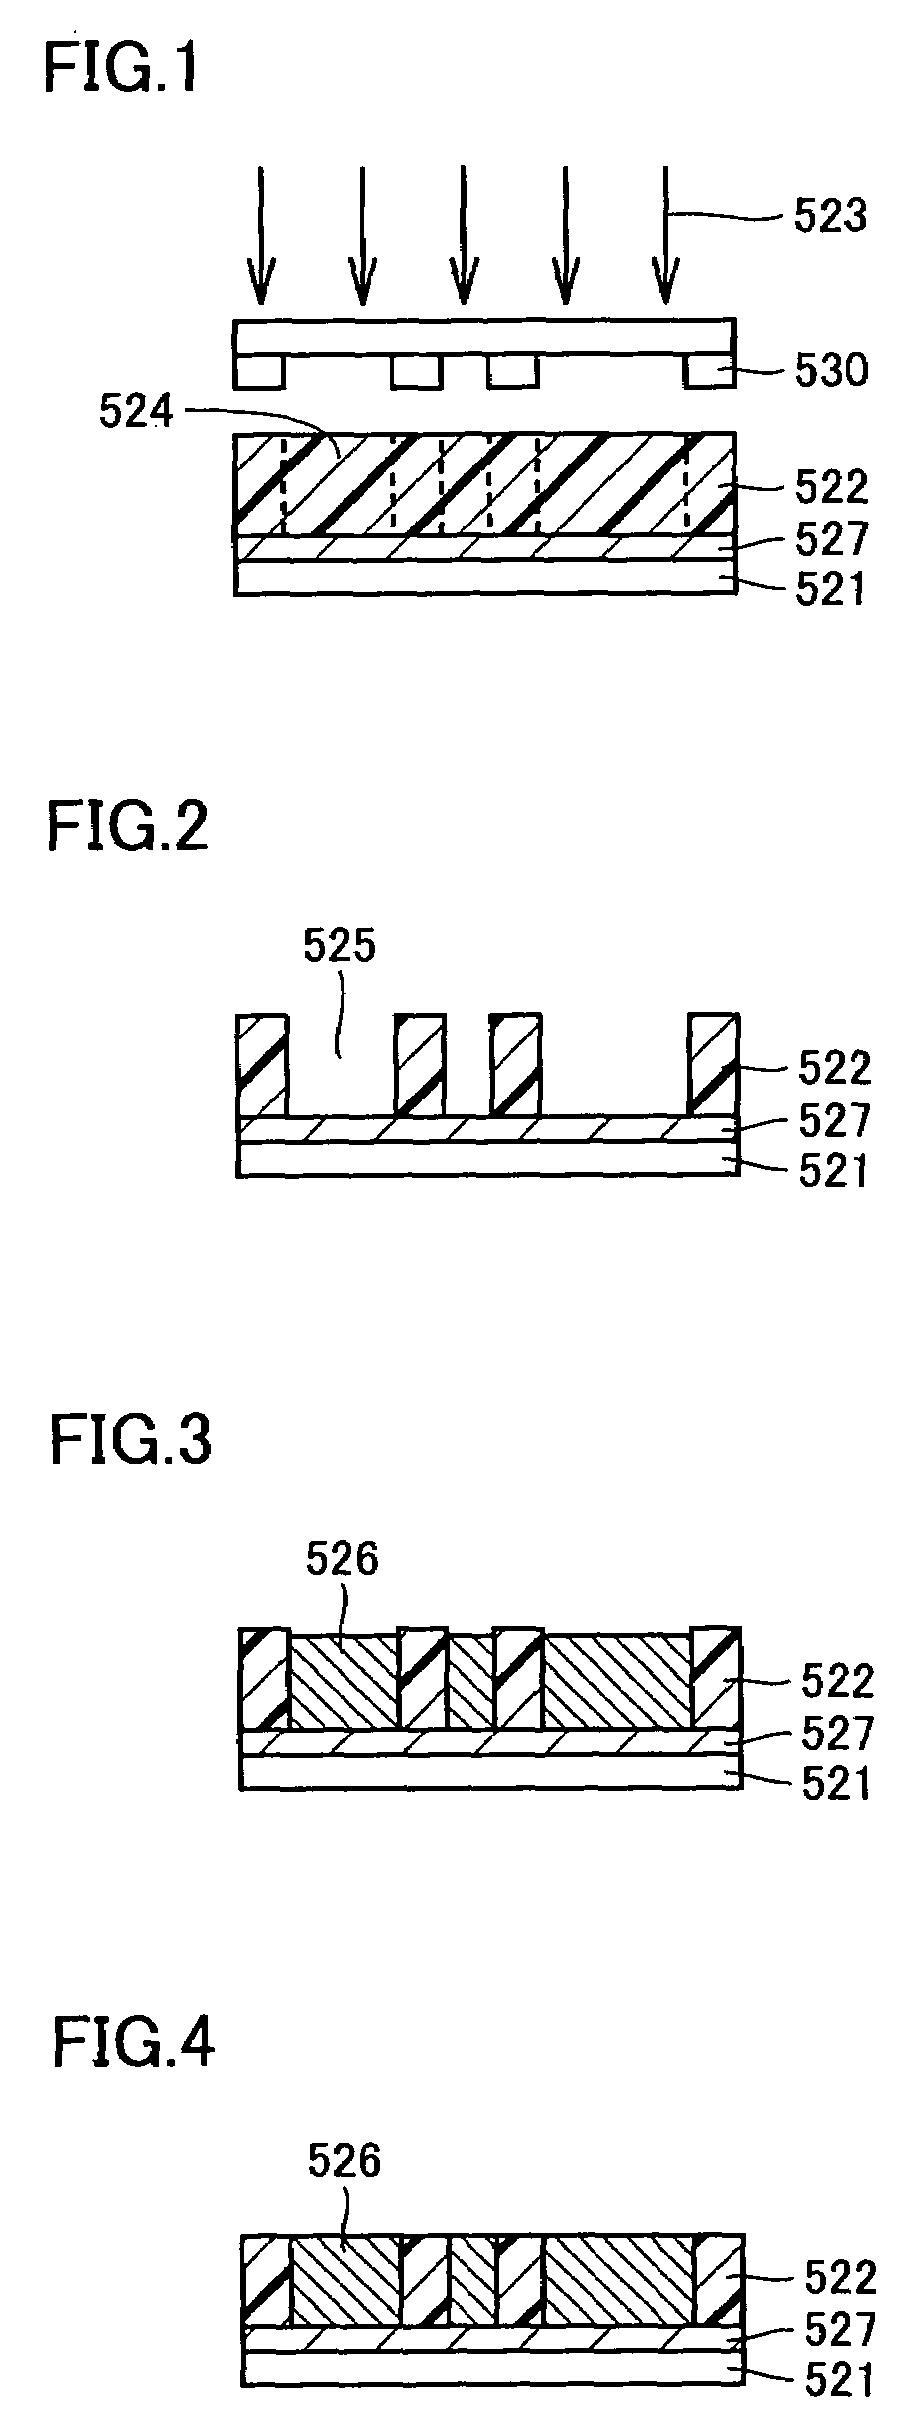 Contact probe, method of manufacturing the contact probe, and device and method for inspection